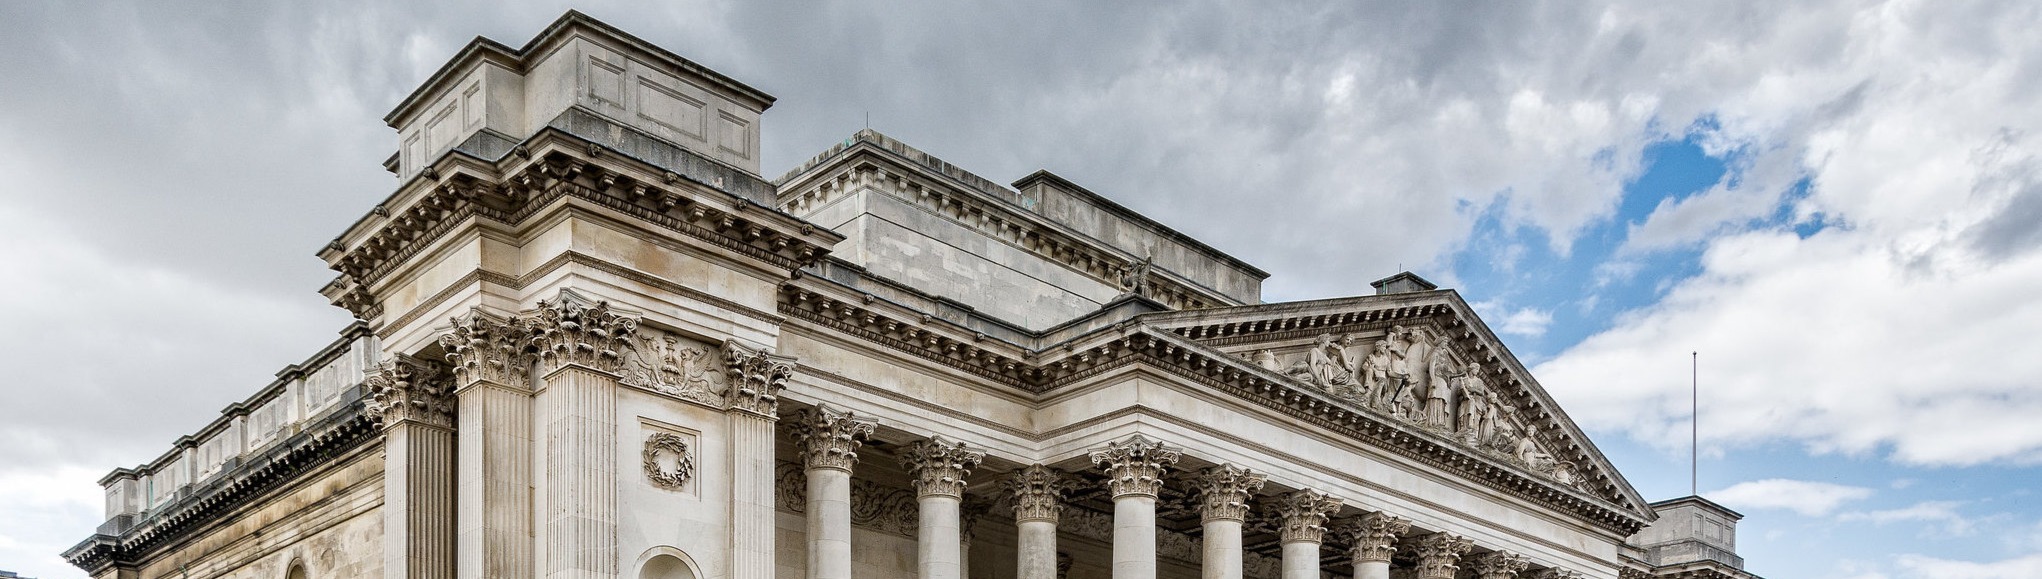 The Basevi designed Founder's Building of the Fitzwilliam Museum